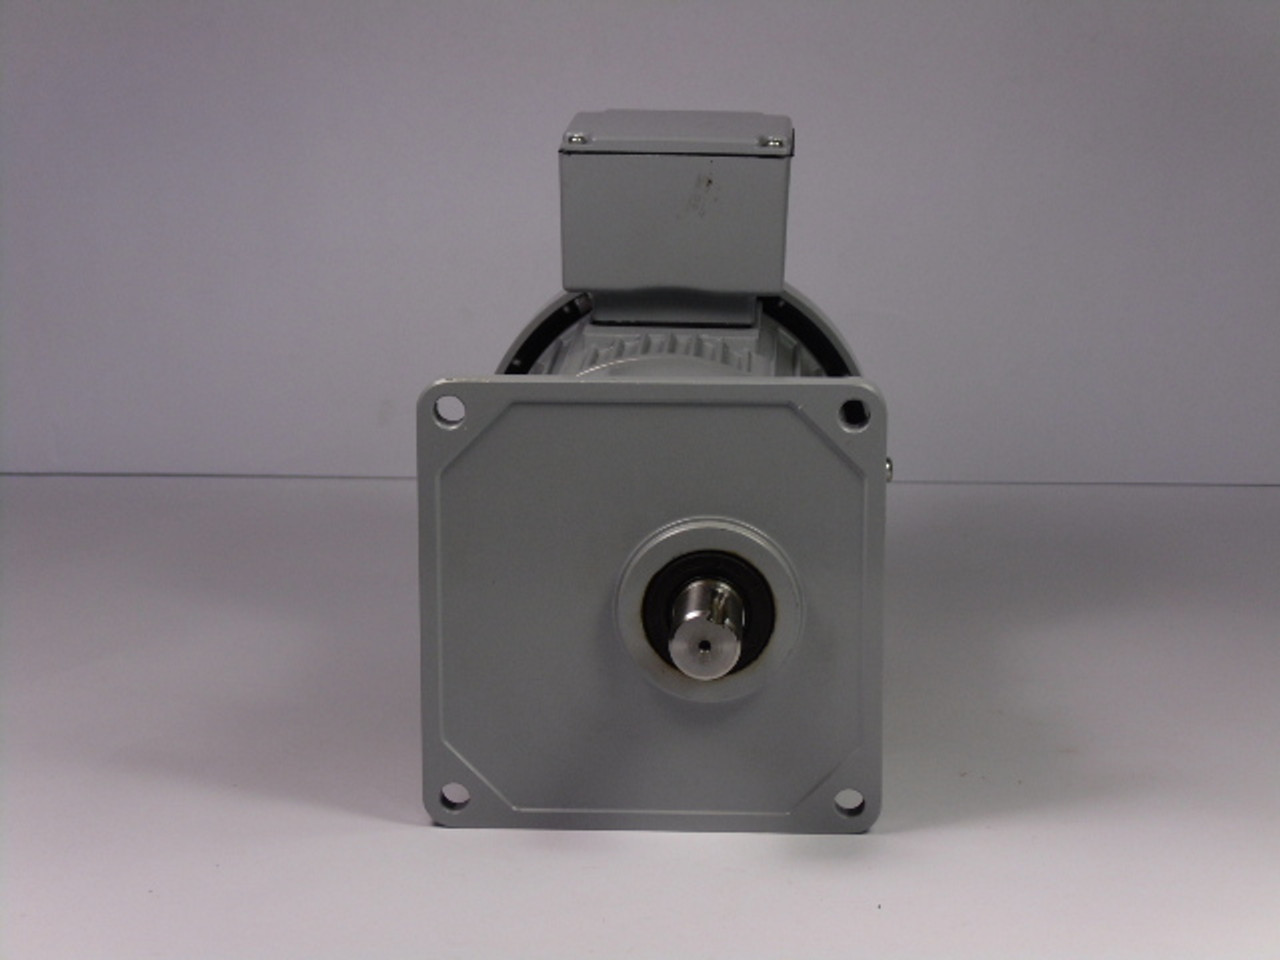 Brother 1/4HP 1720RPM 460V TEFC 3Ph 0.50A 60Hz Ratio 20:1 USED